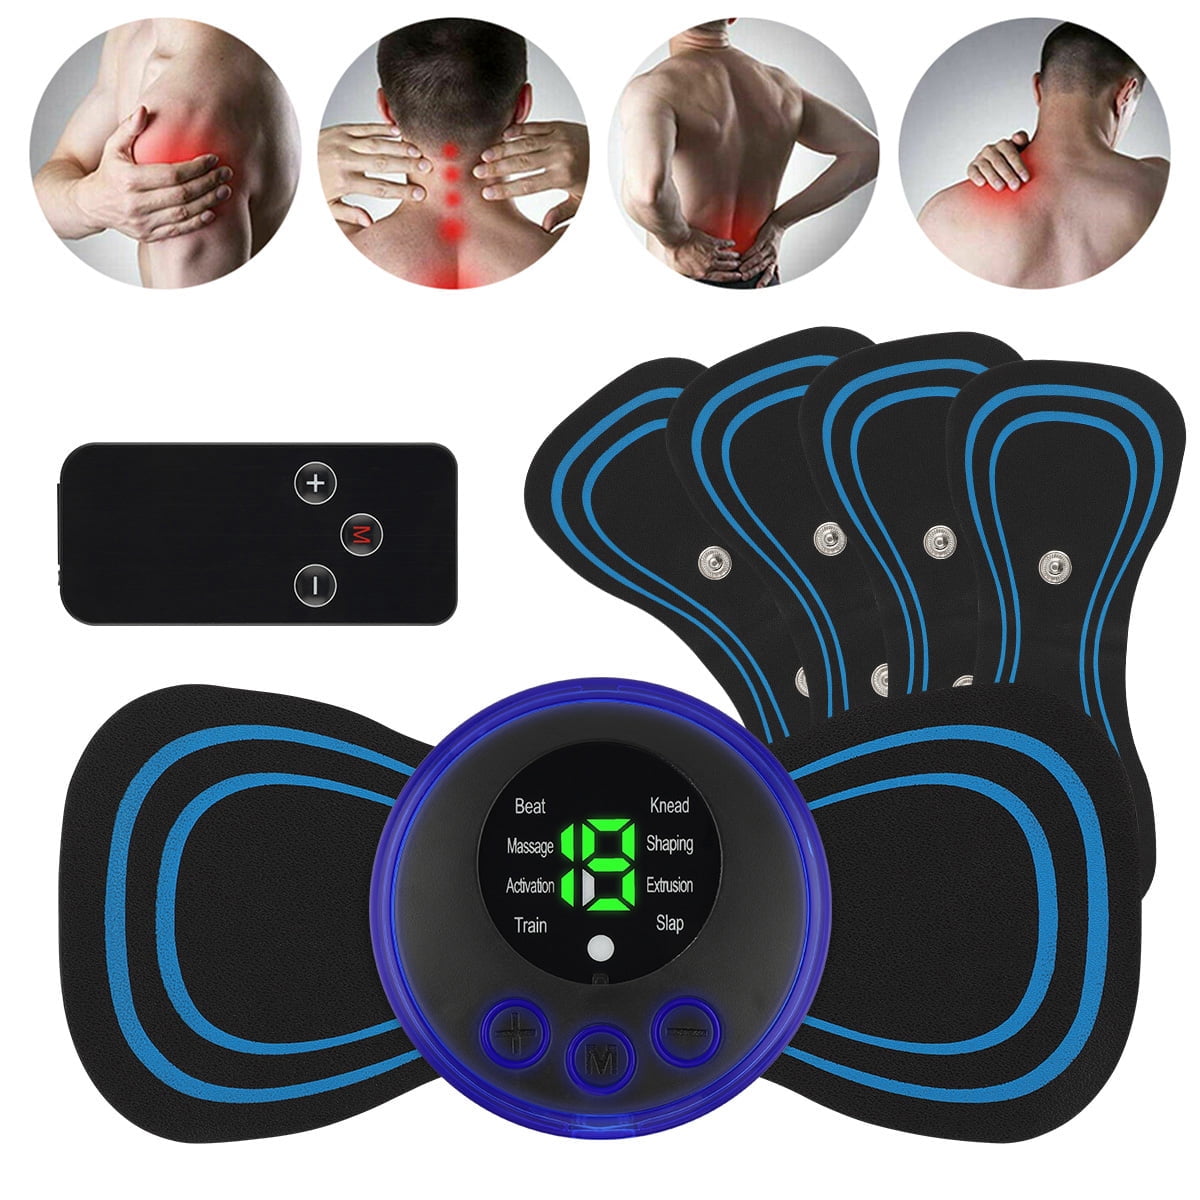 Neck/Back Portable Massager for Home/Work/In Car- Like New! - general for  sale - by owner - craigslist